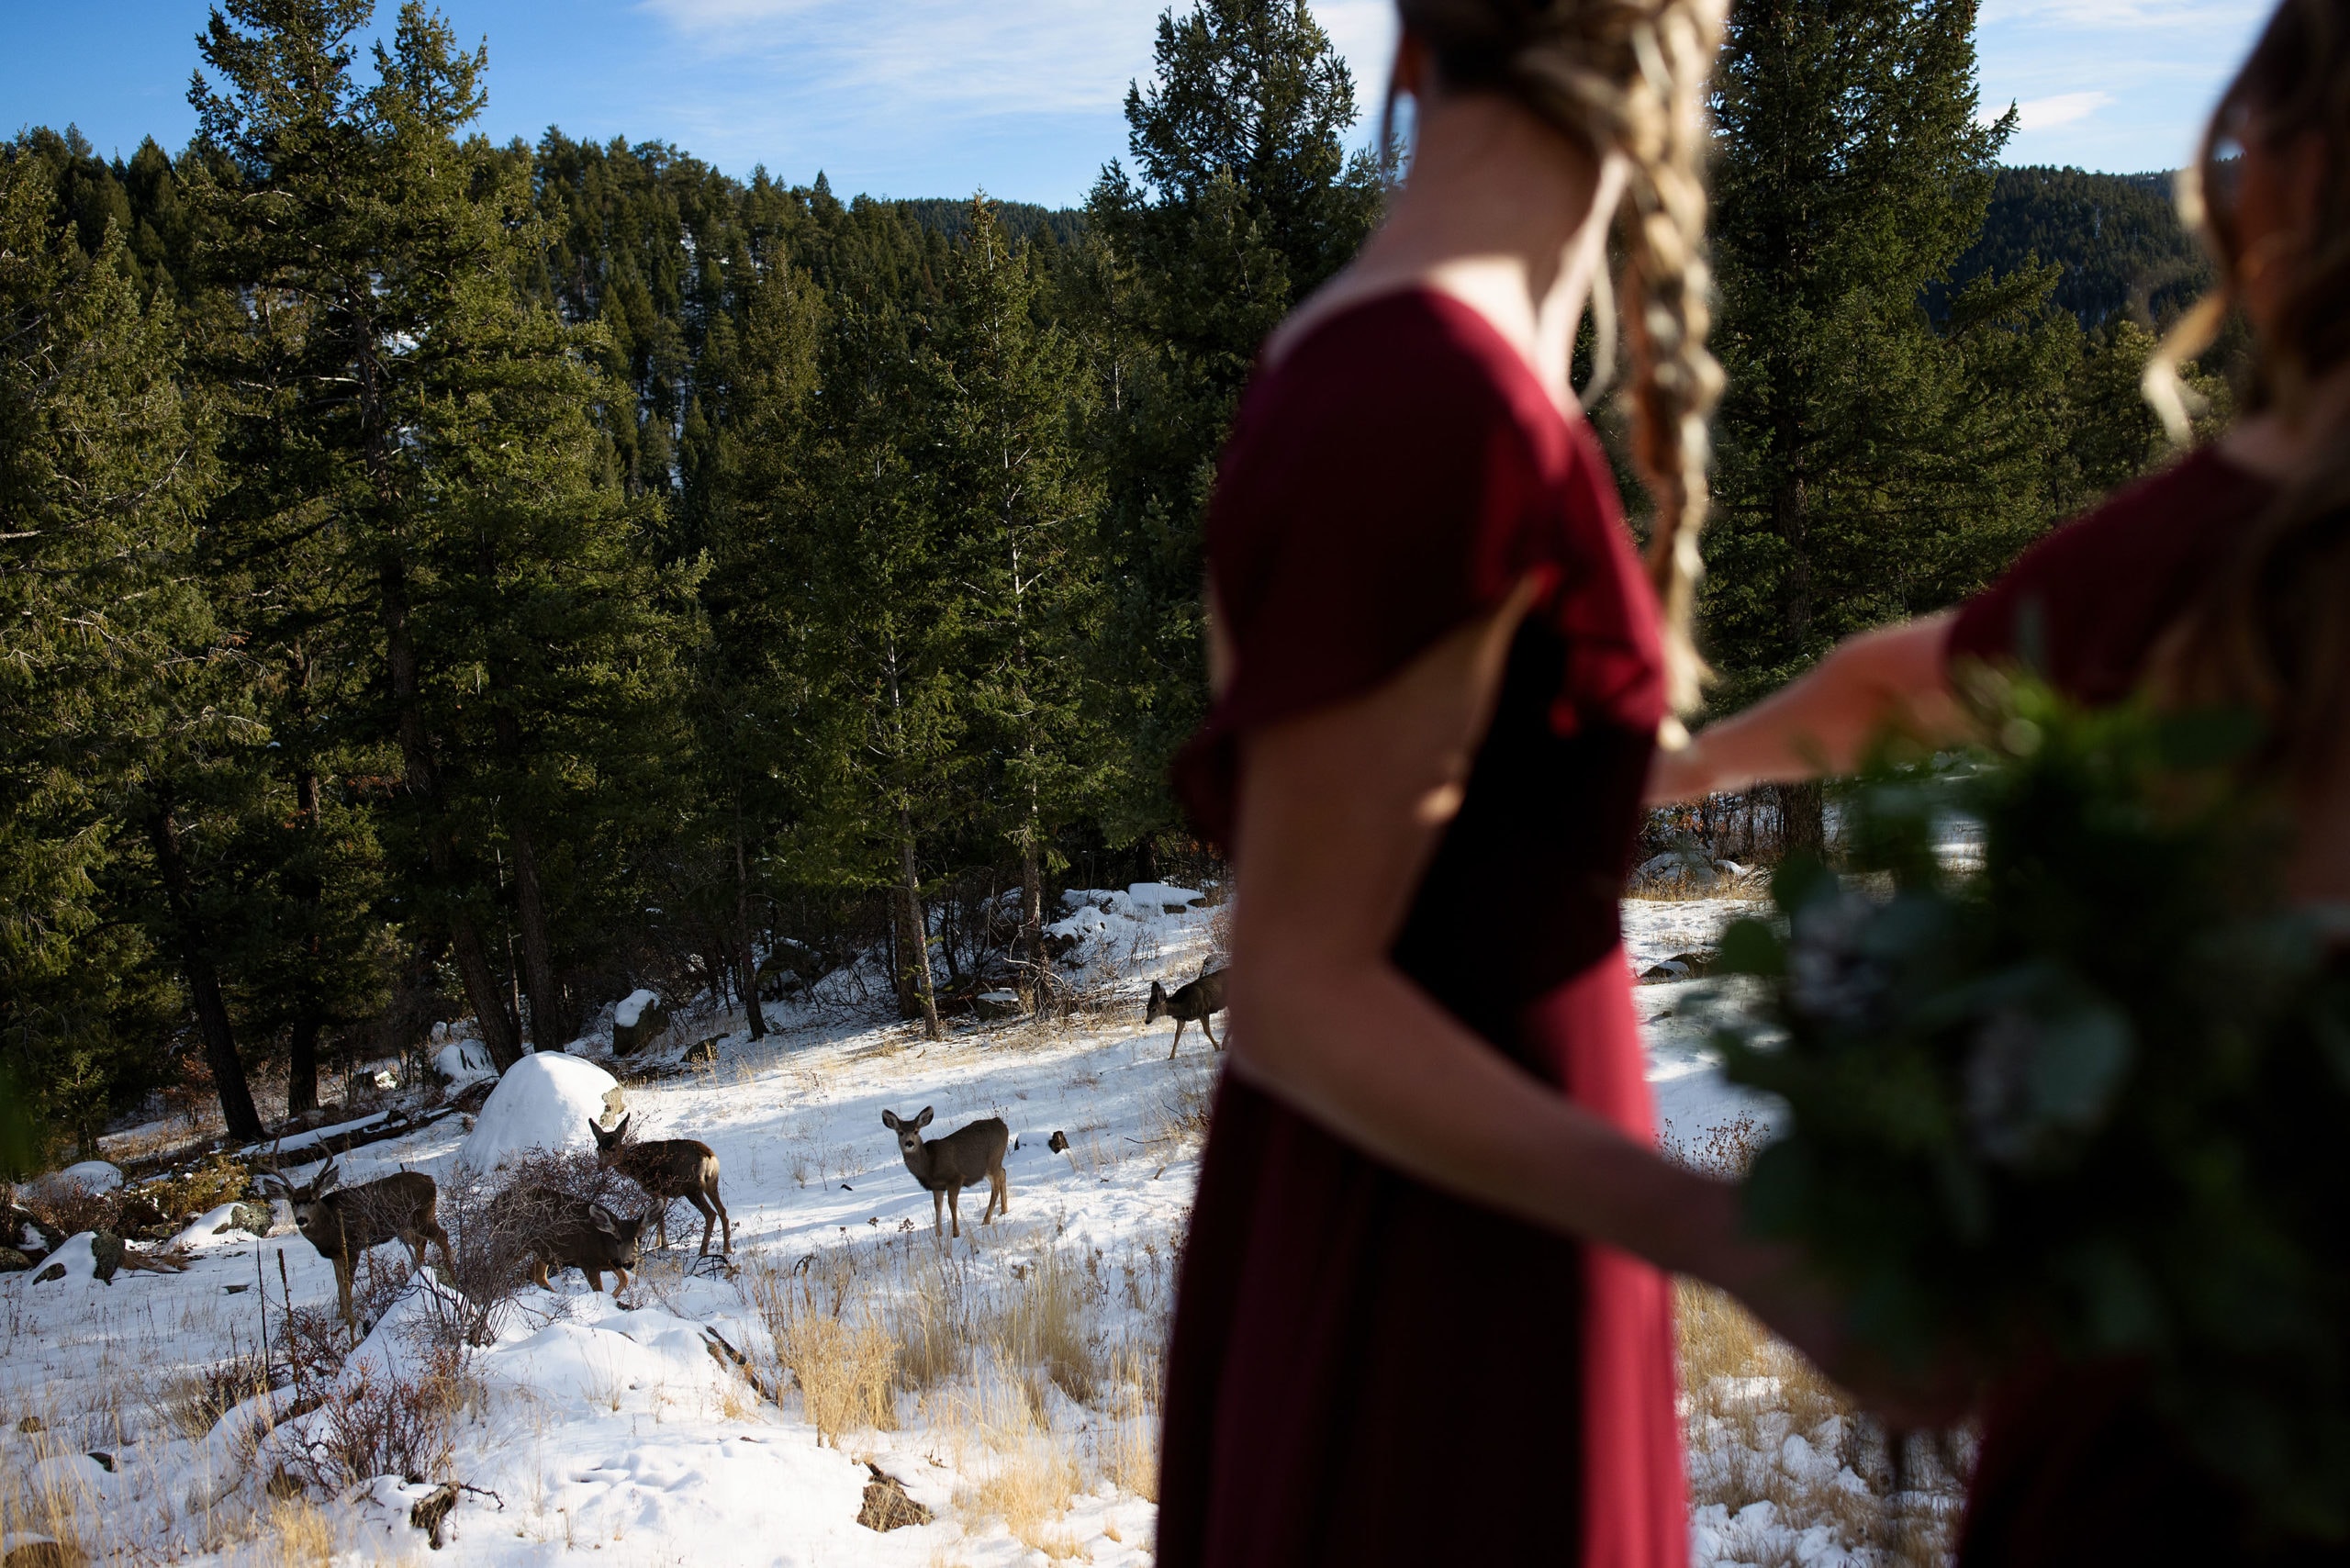 A herd of deer walk past the wedding ceremony as bridesmaids look on at Woodlands